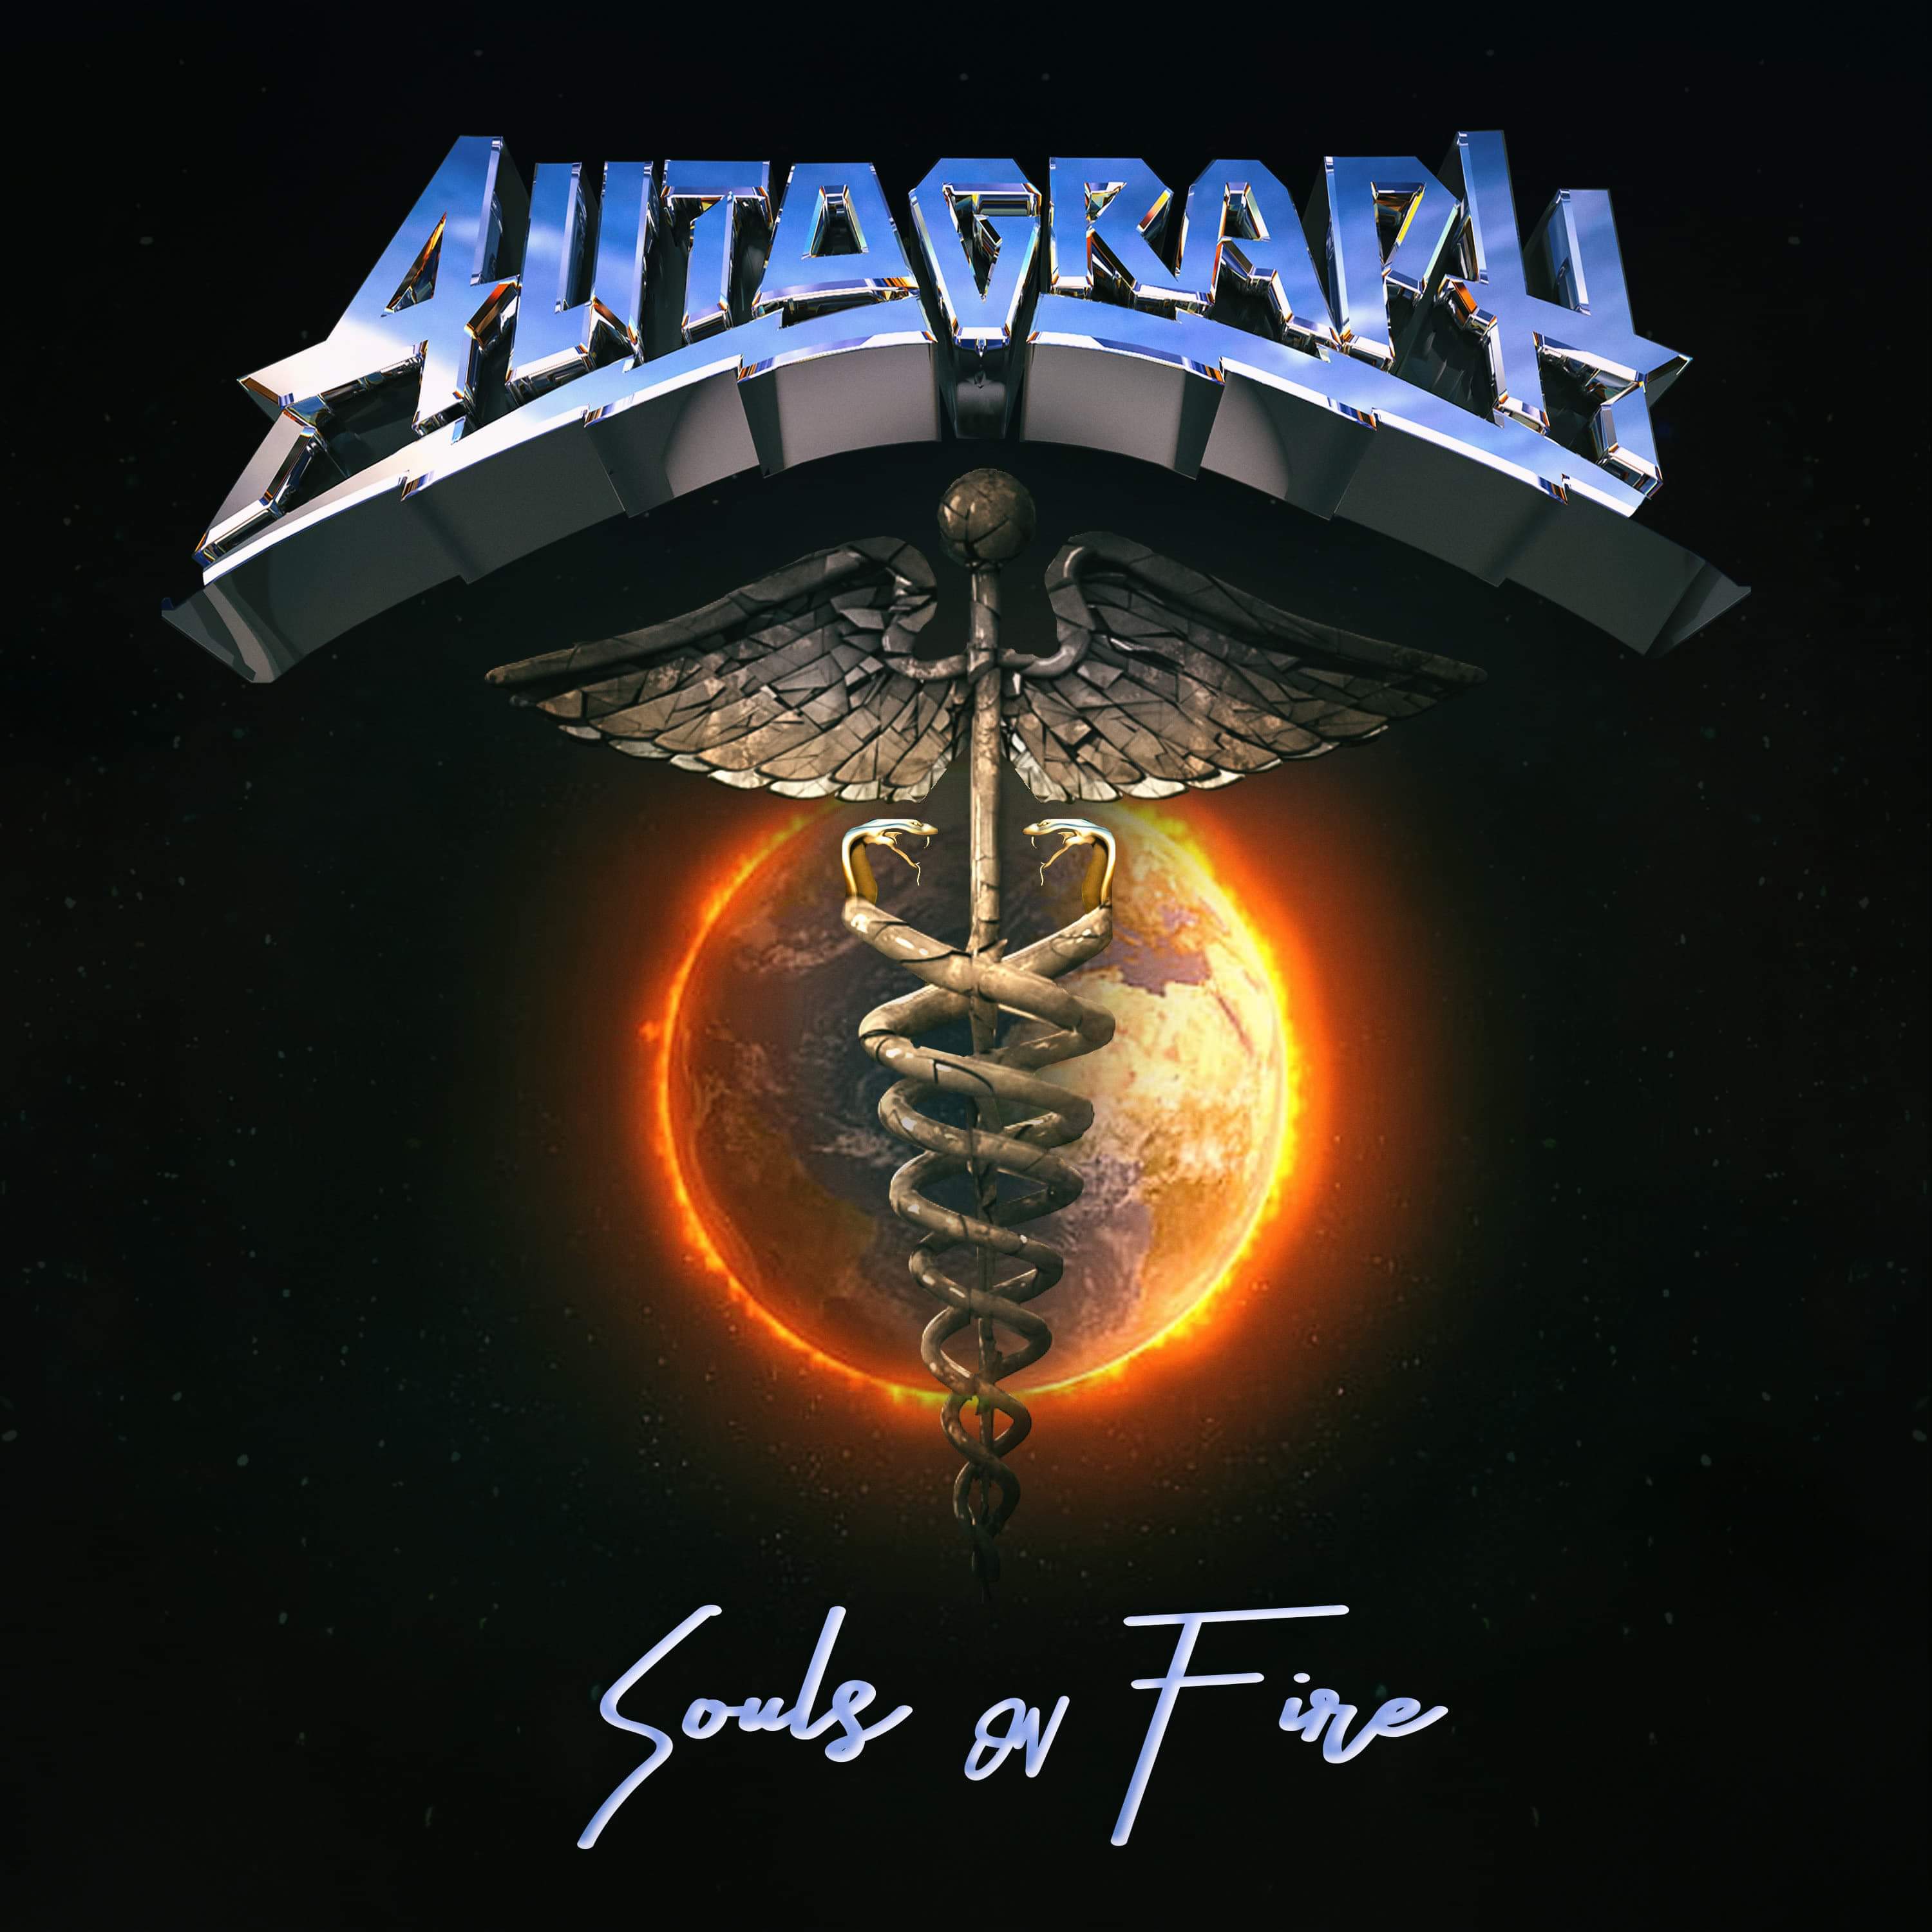 AUTOGRAPH RELEASE NEW SINGLE ‘SOULS ON FIRE’, WITH PROCEEDS TO BENEFIT TRINITY HEALTH OF NEW ENGLAND.